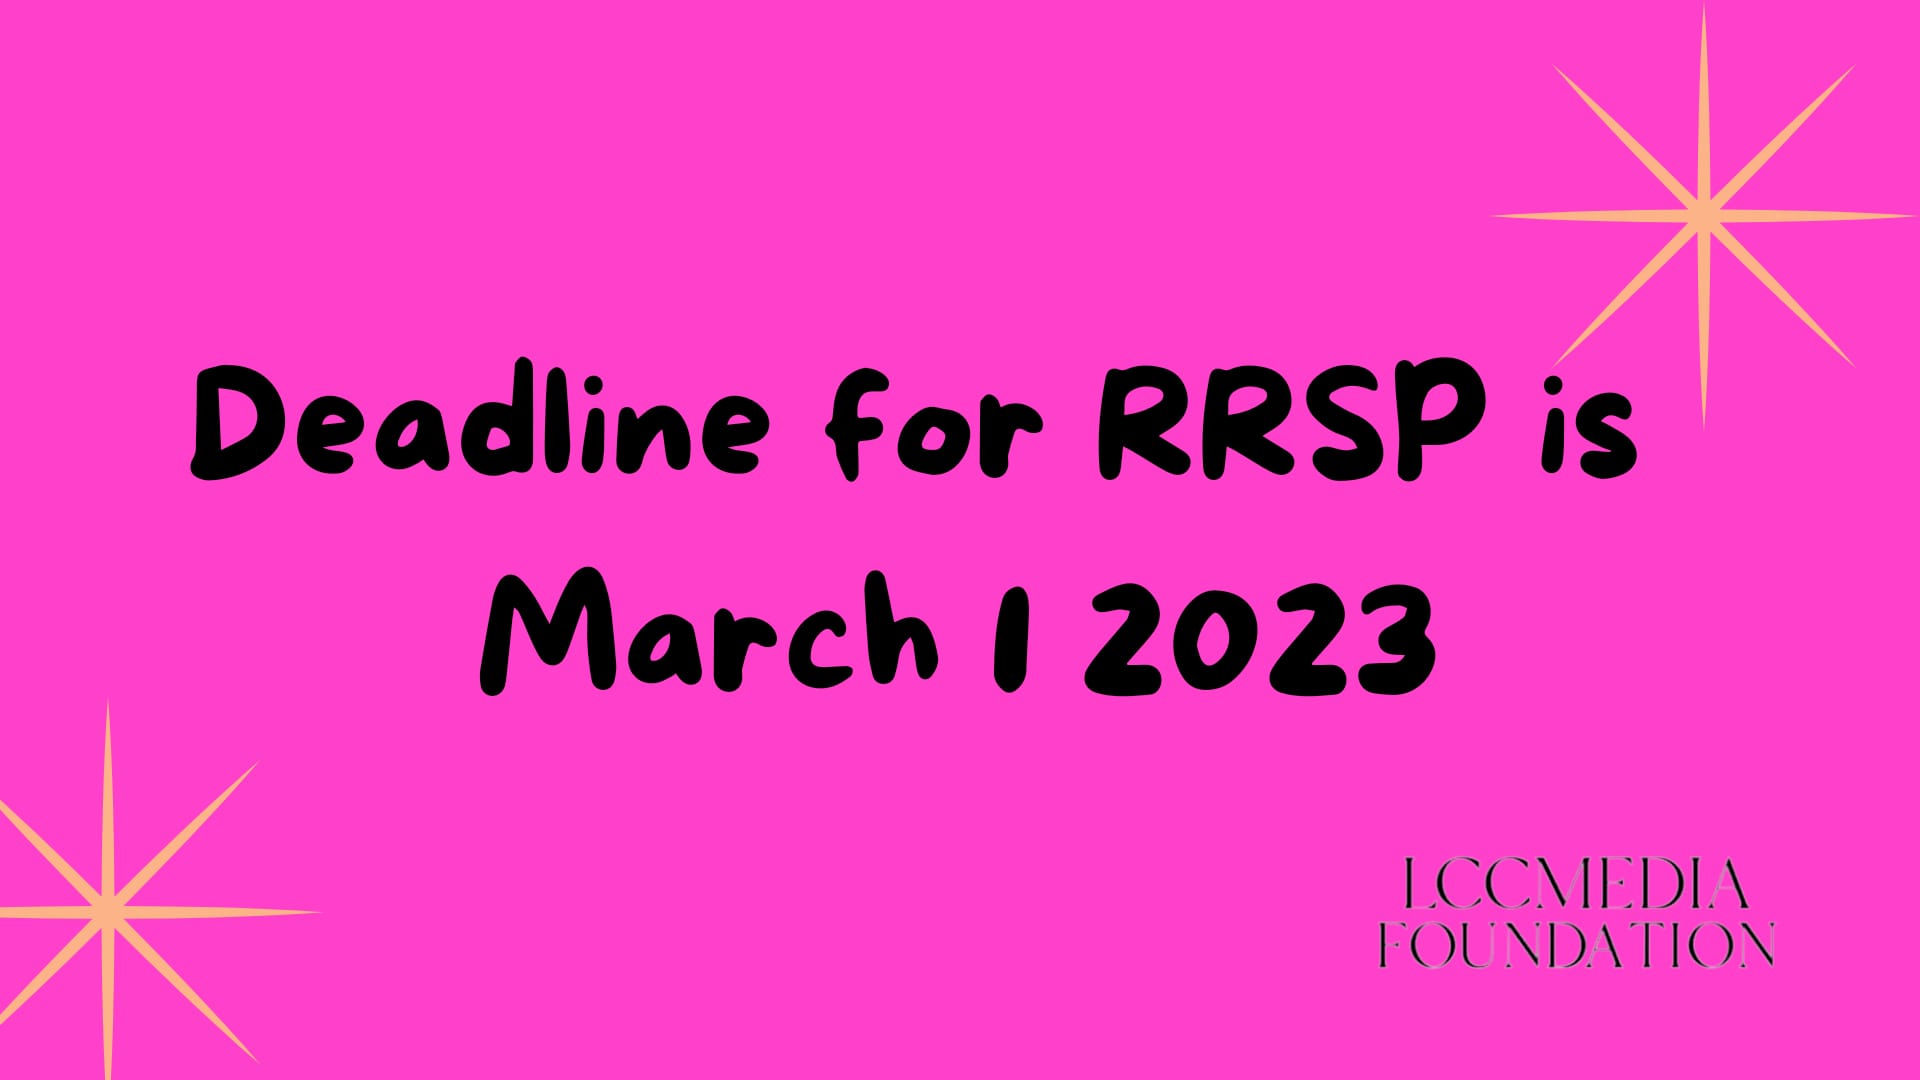 The contribution deadline is March 1, 2023.